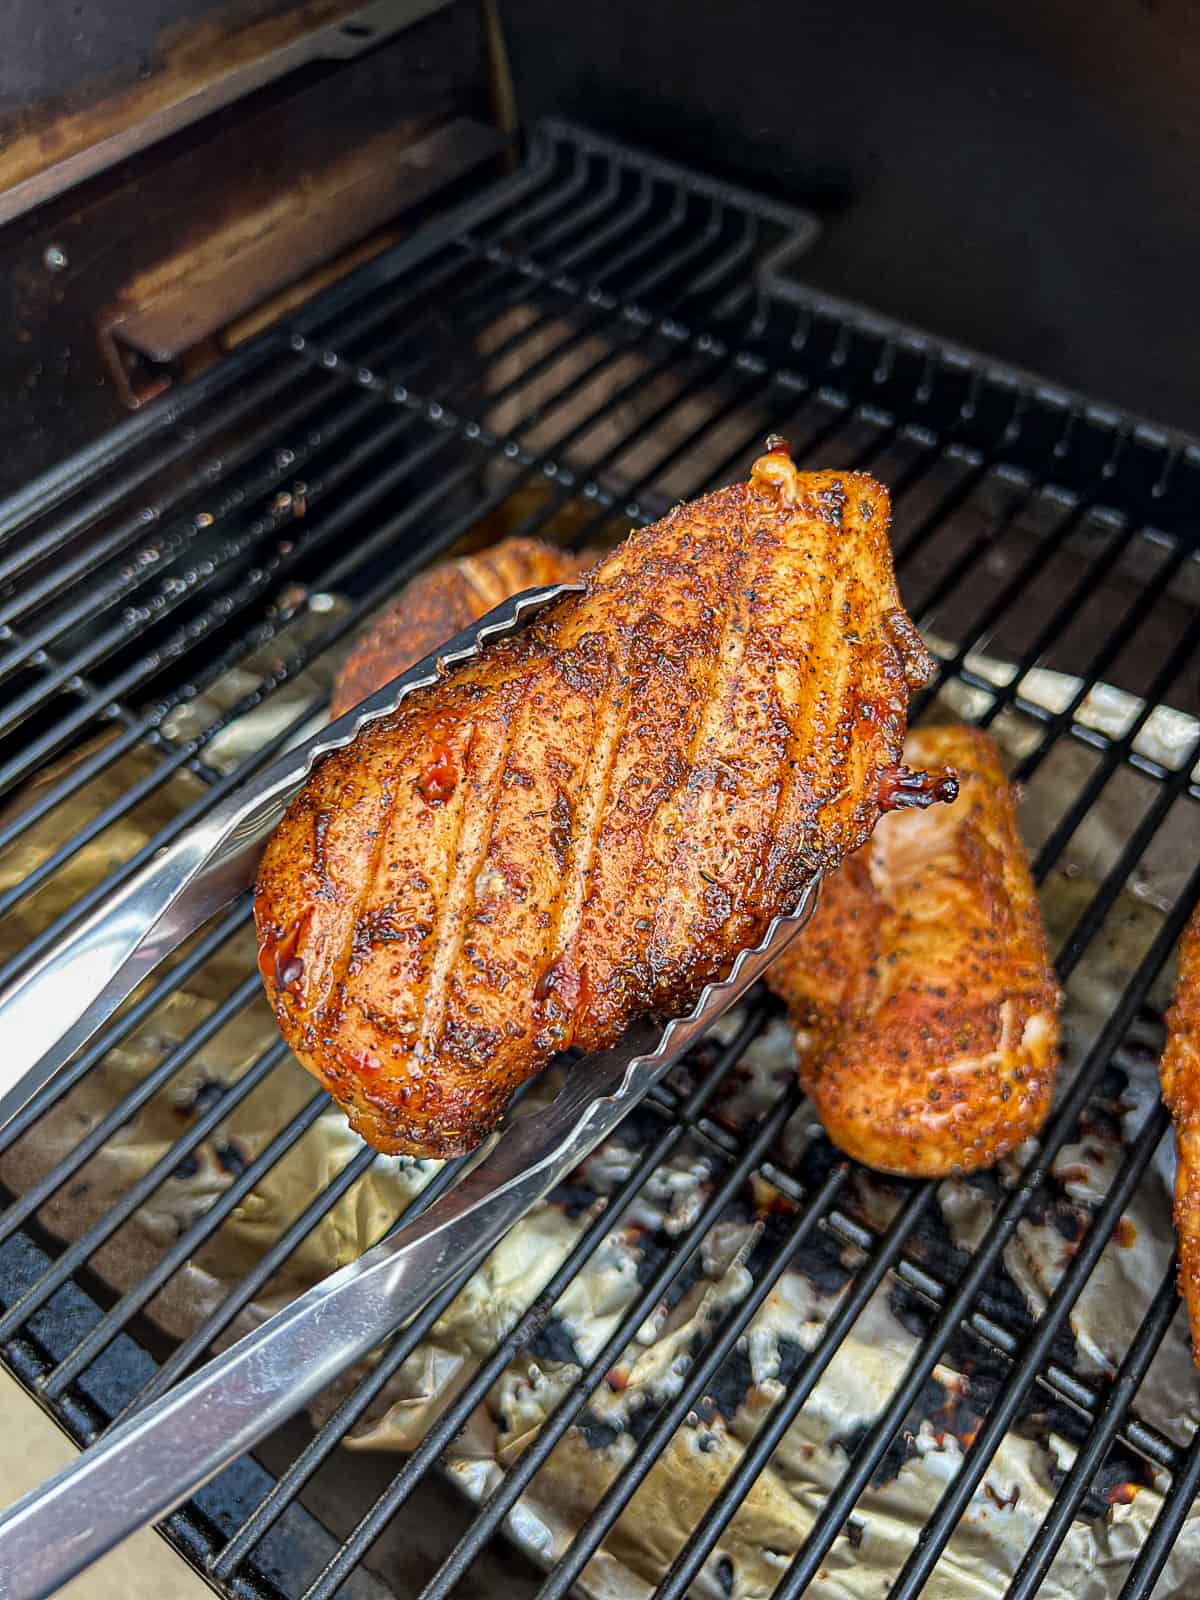 Tongs holding smoked chicken breasts over Traeger pellet grill